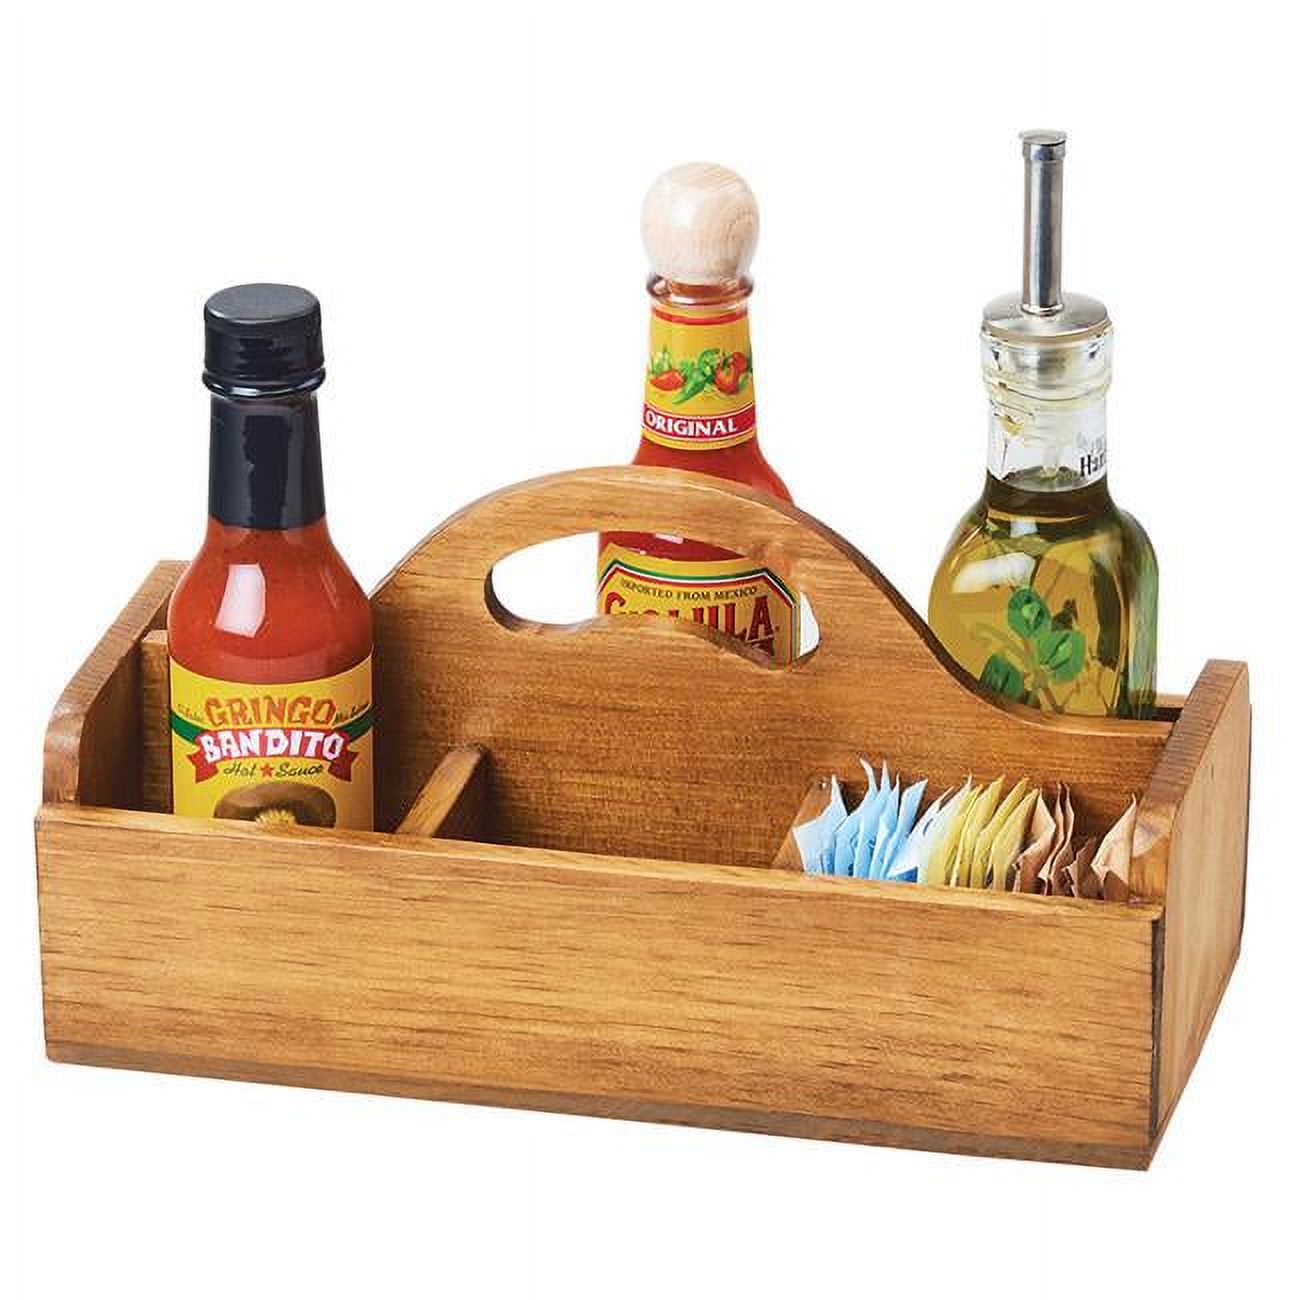 Cal Mil  Madera Section Reclaimed Wood Condiment Caddy with Handle 10.25 x 5 x 5.5 in. - image 1 of 1